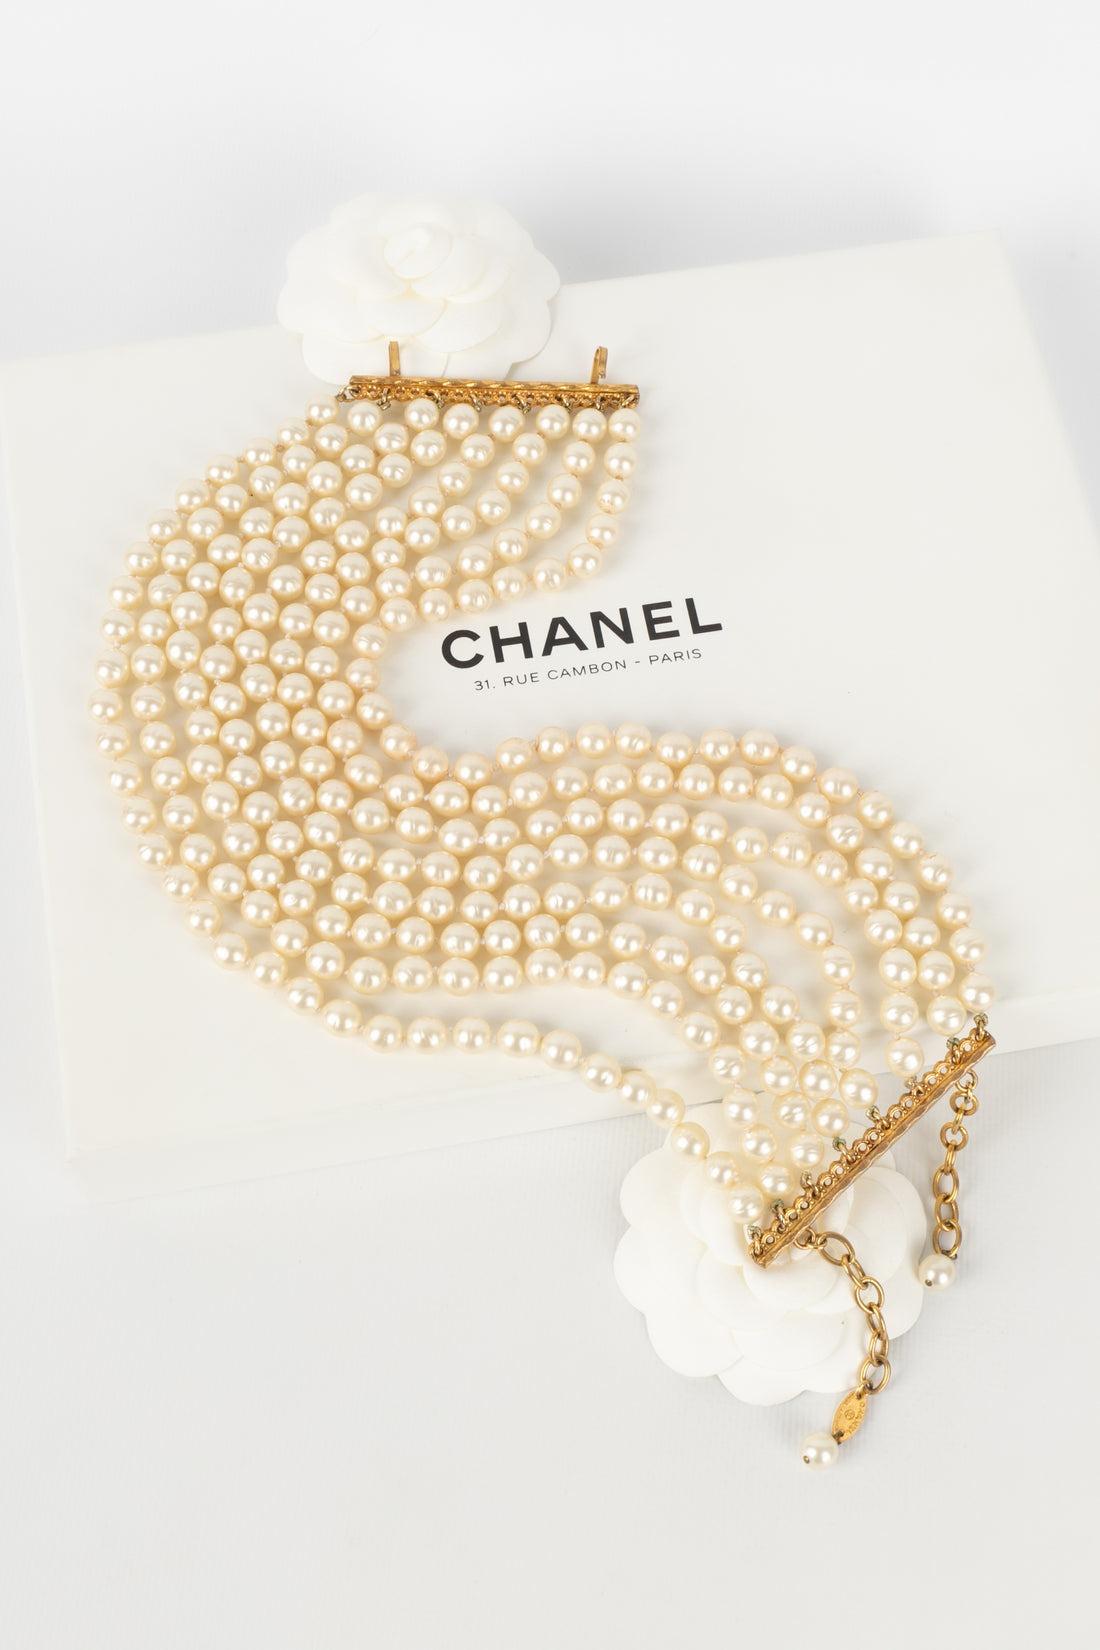 Chanel Golden Metal Choker Necklace with Costumer Pearls, 1980s 4